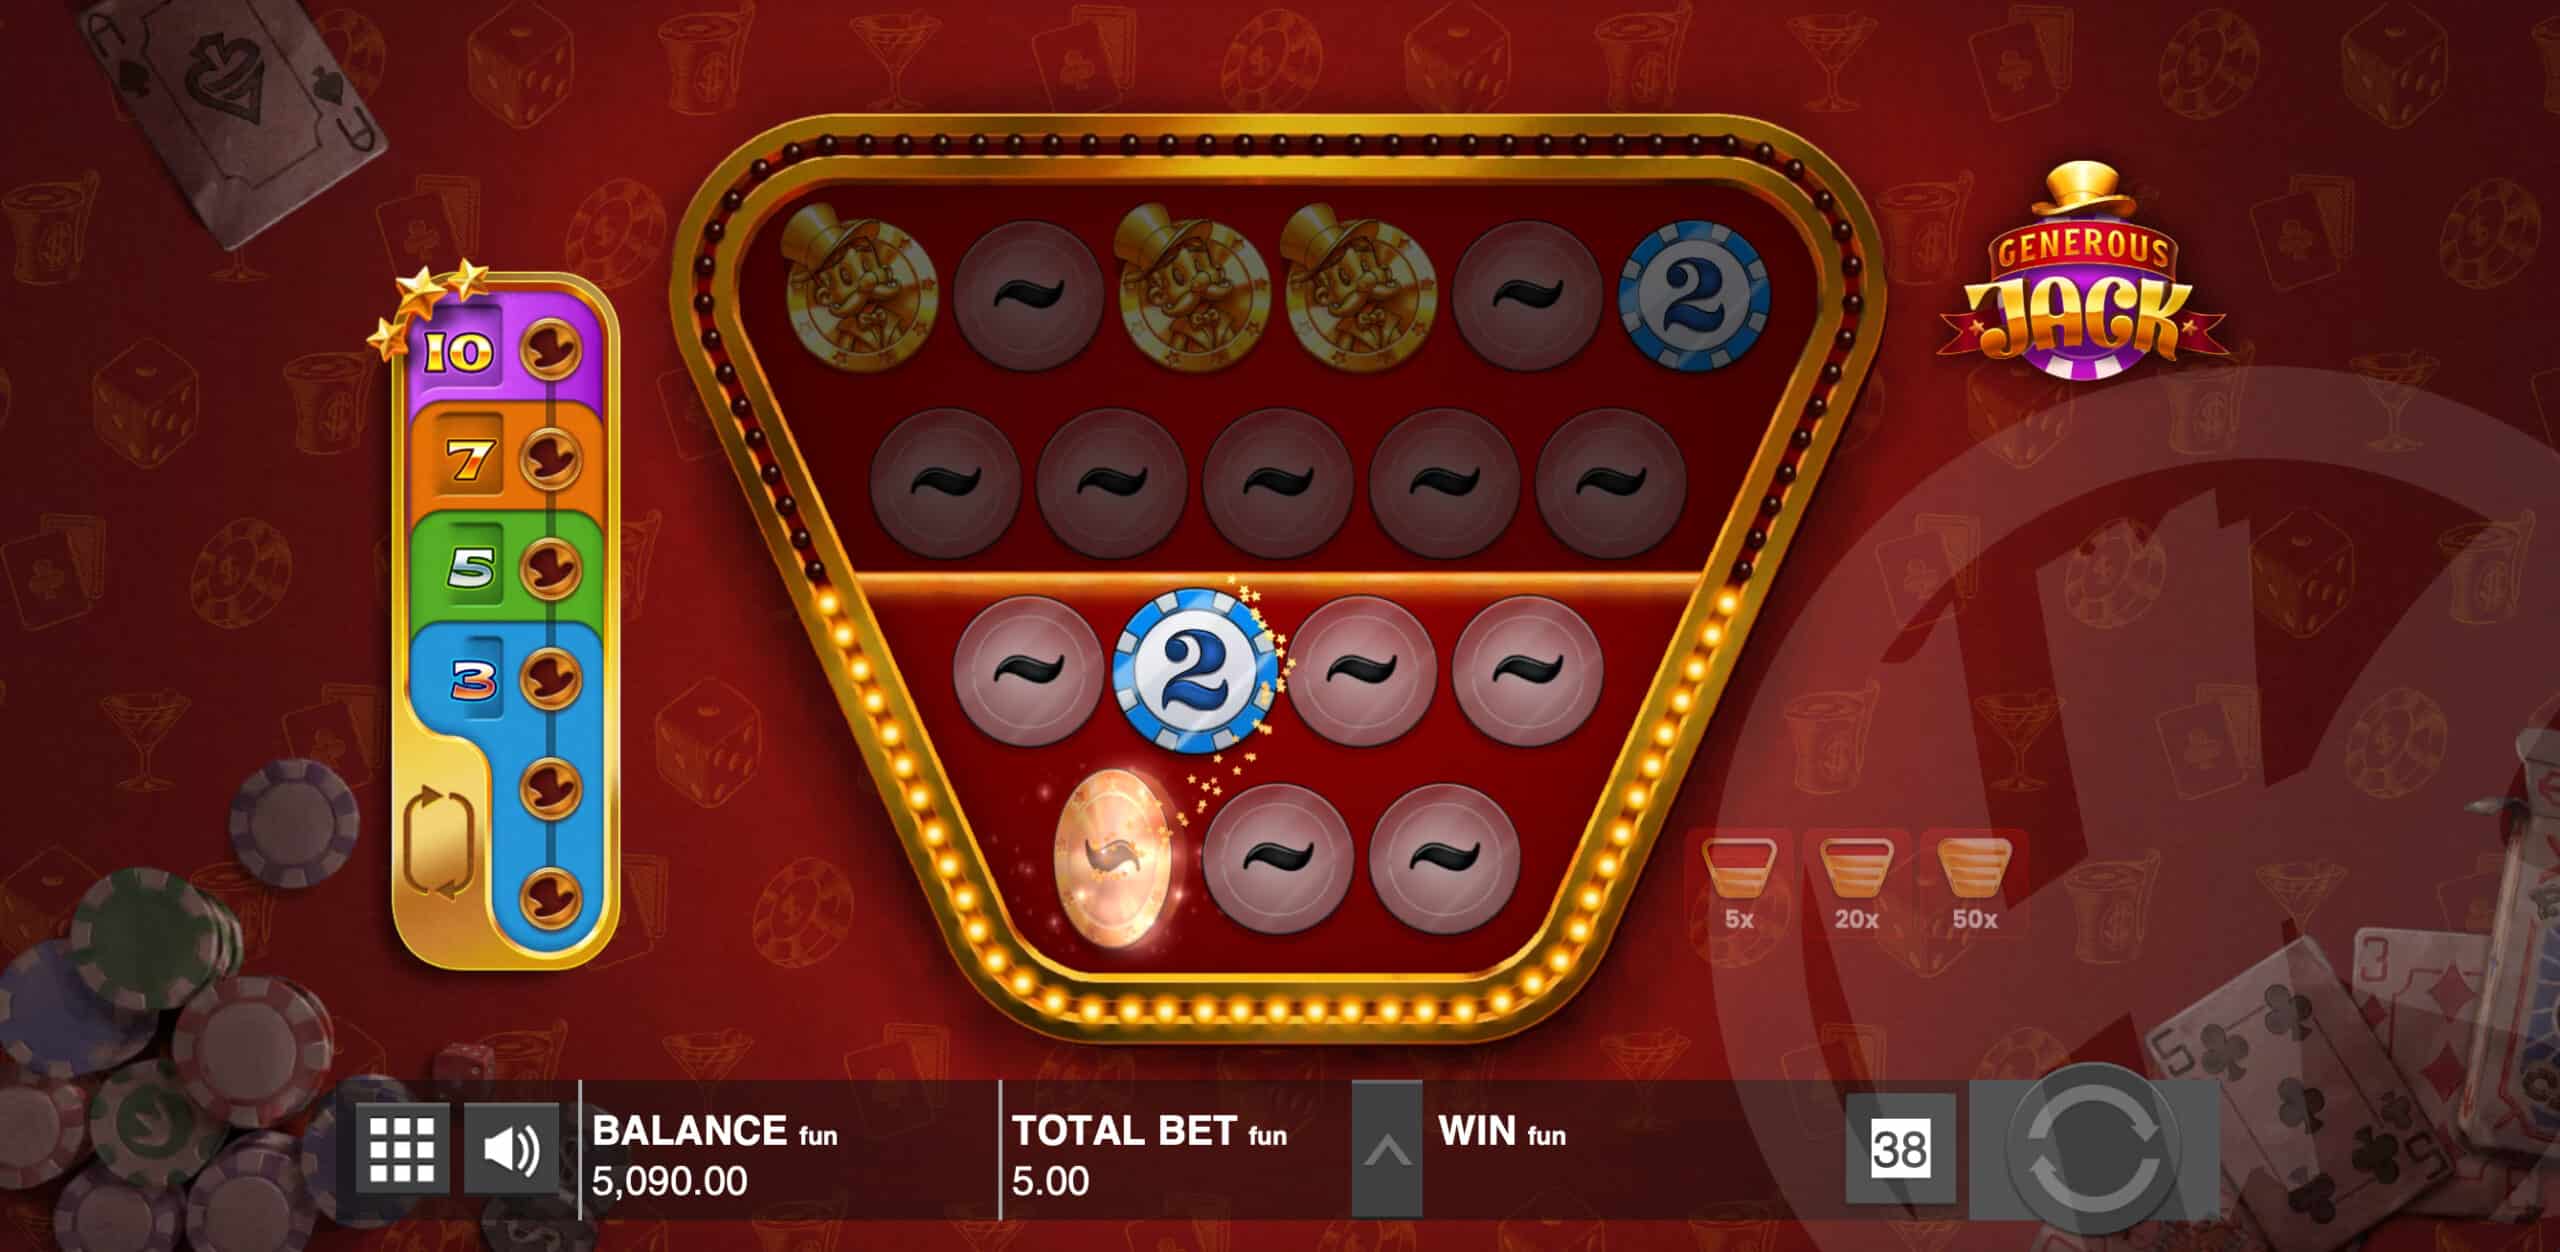 Land Jack Symbols to Trigger Free Spins and Unlock Additional Rows